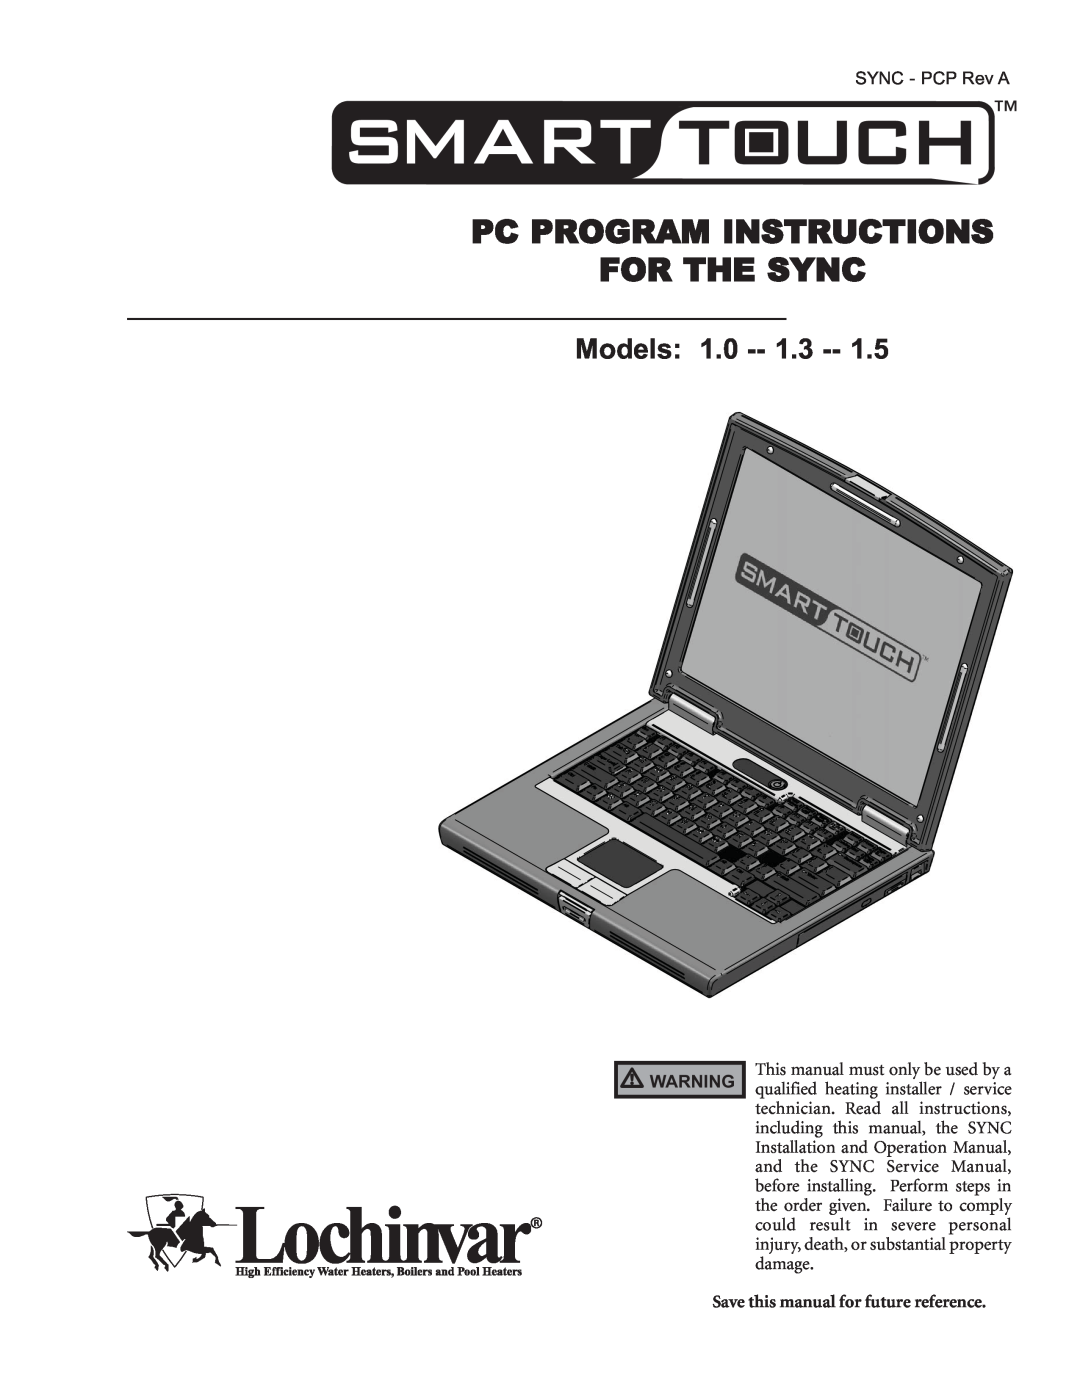 Lochinvar service manual Service Manual, Models: 1.0, 1.3, and 